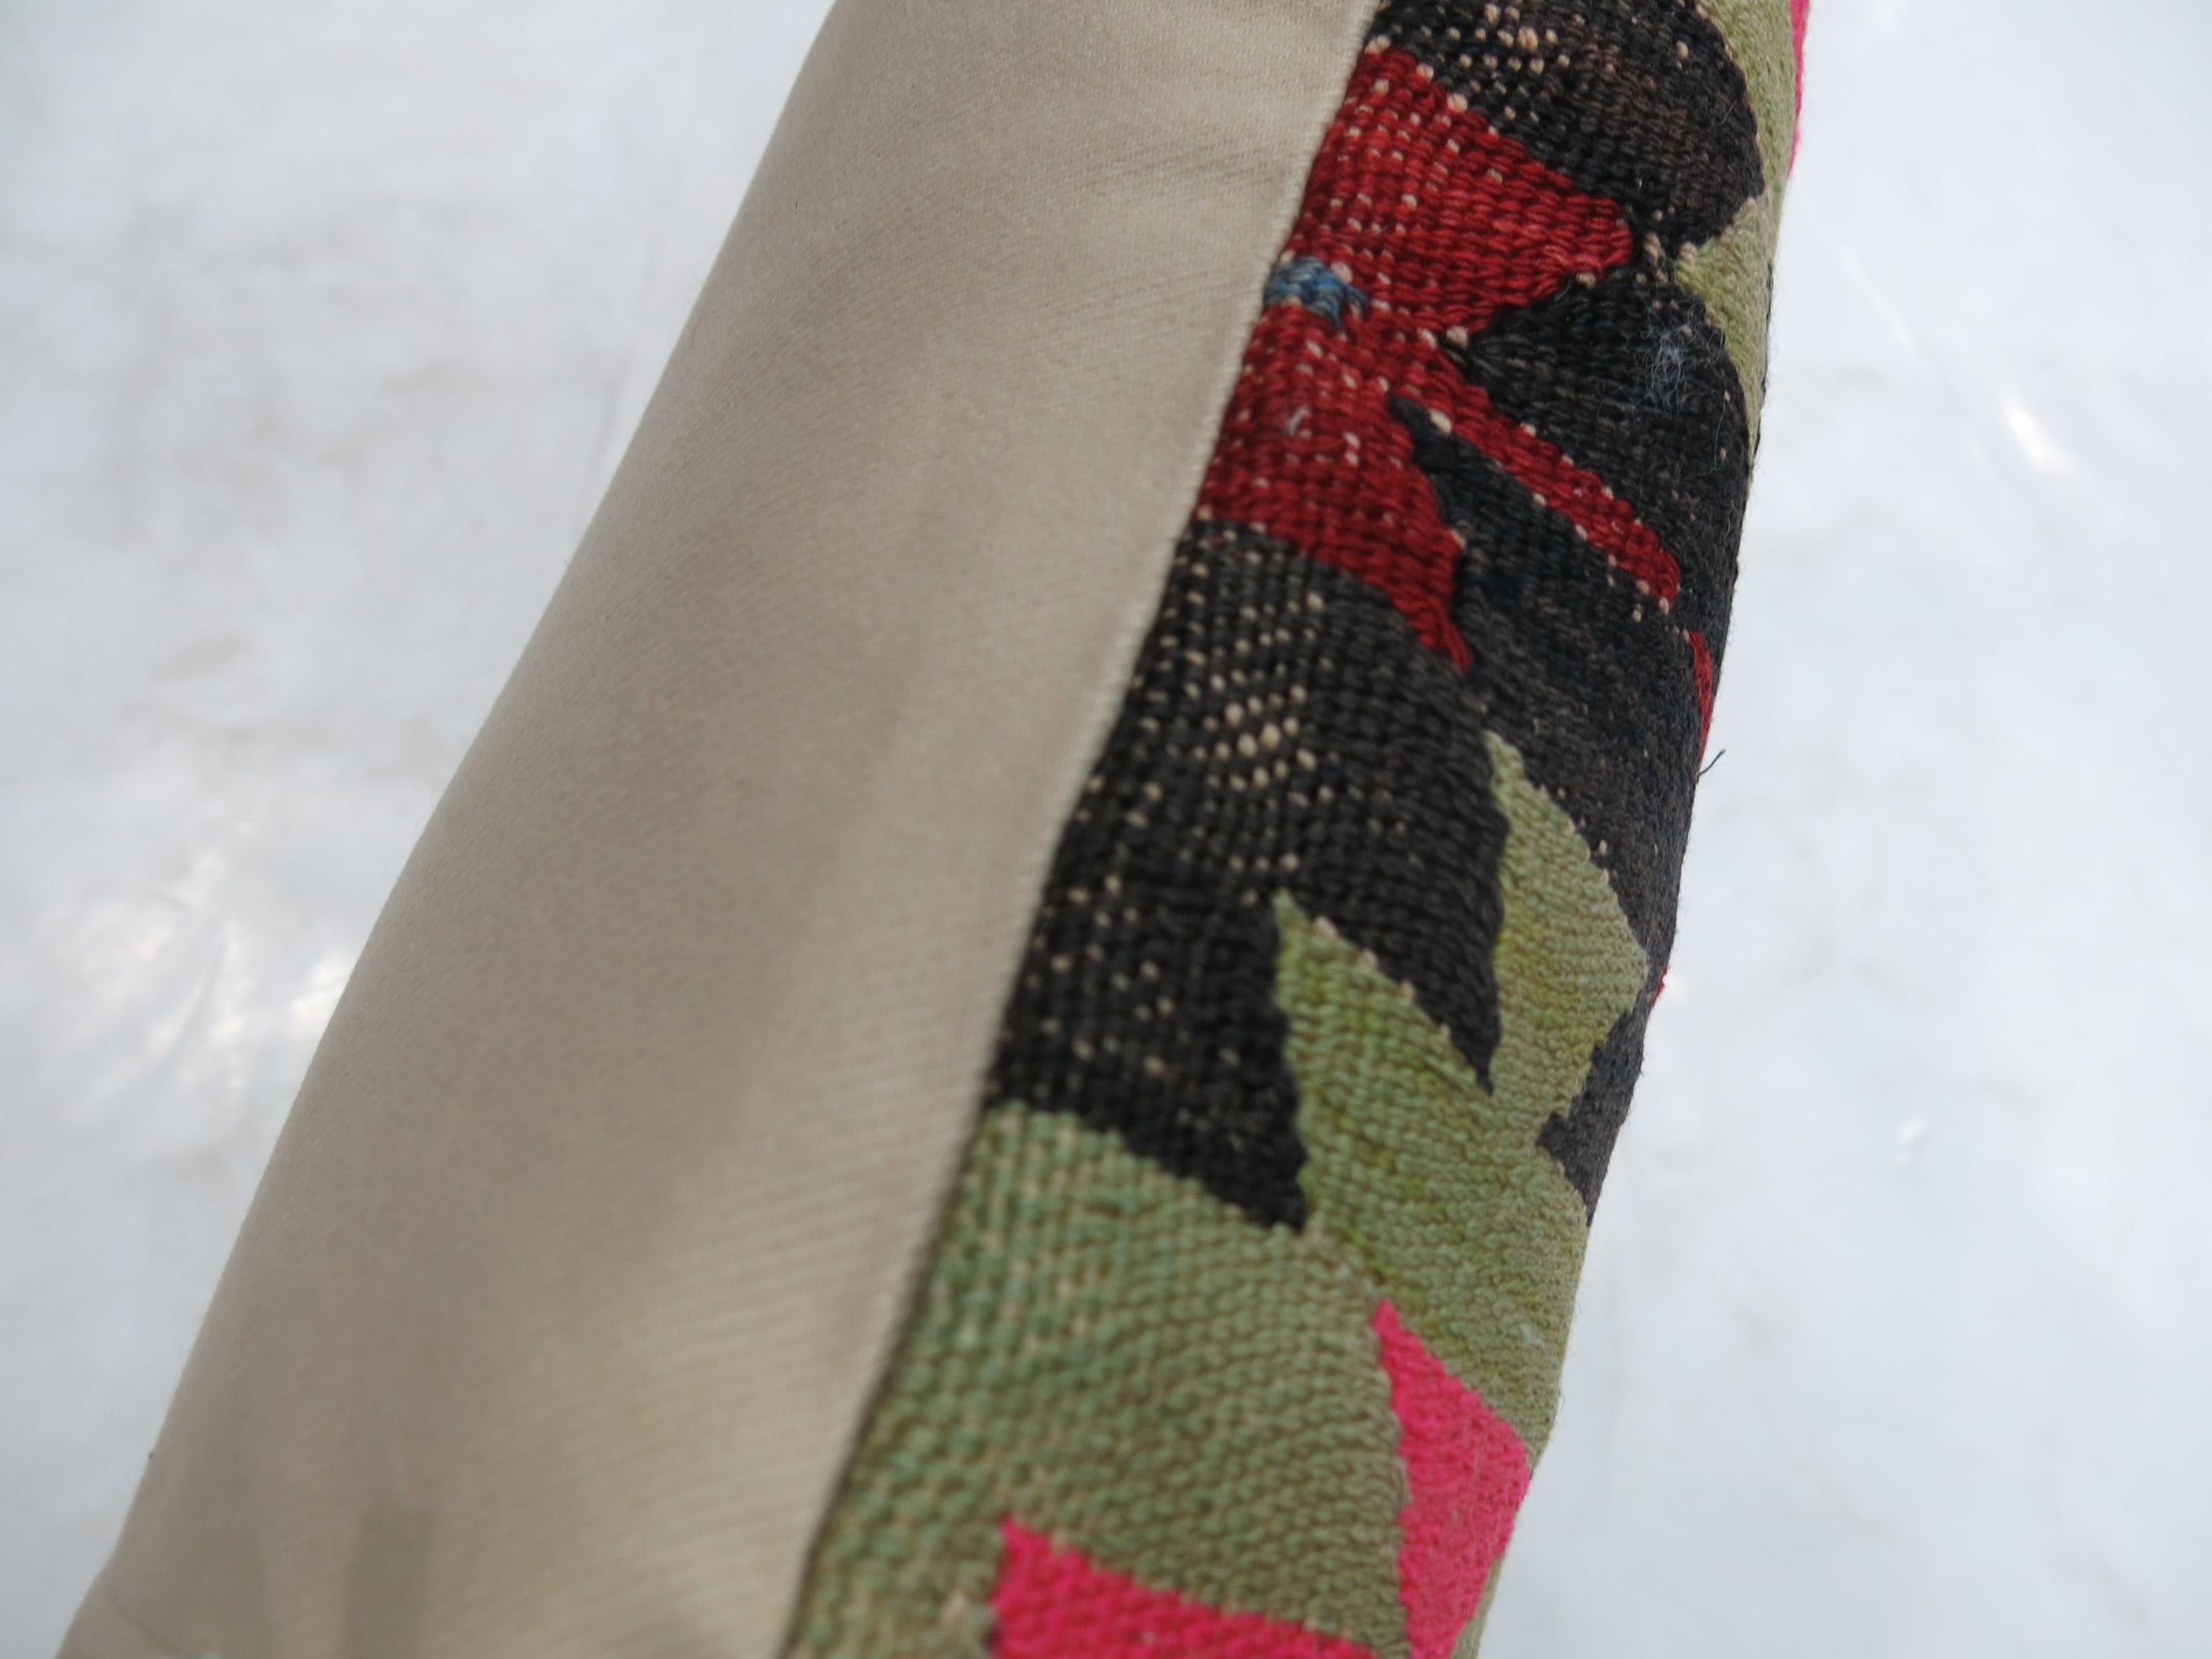 Pillow made from a vintage Turkish Kilim with dominant accents in black and bright pink.

Measures: 16